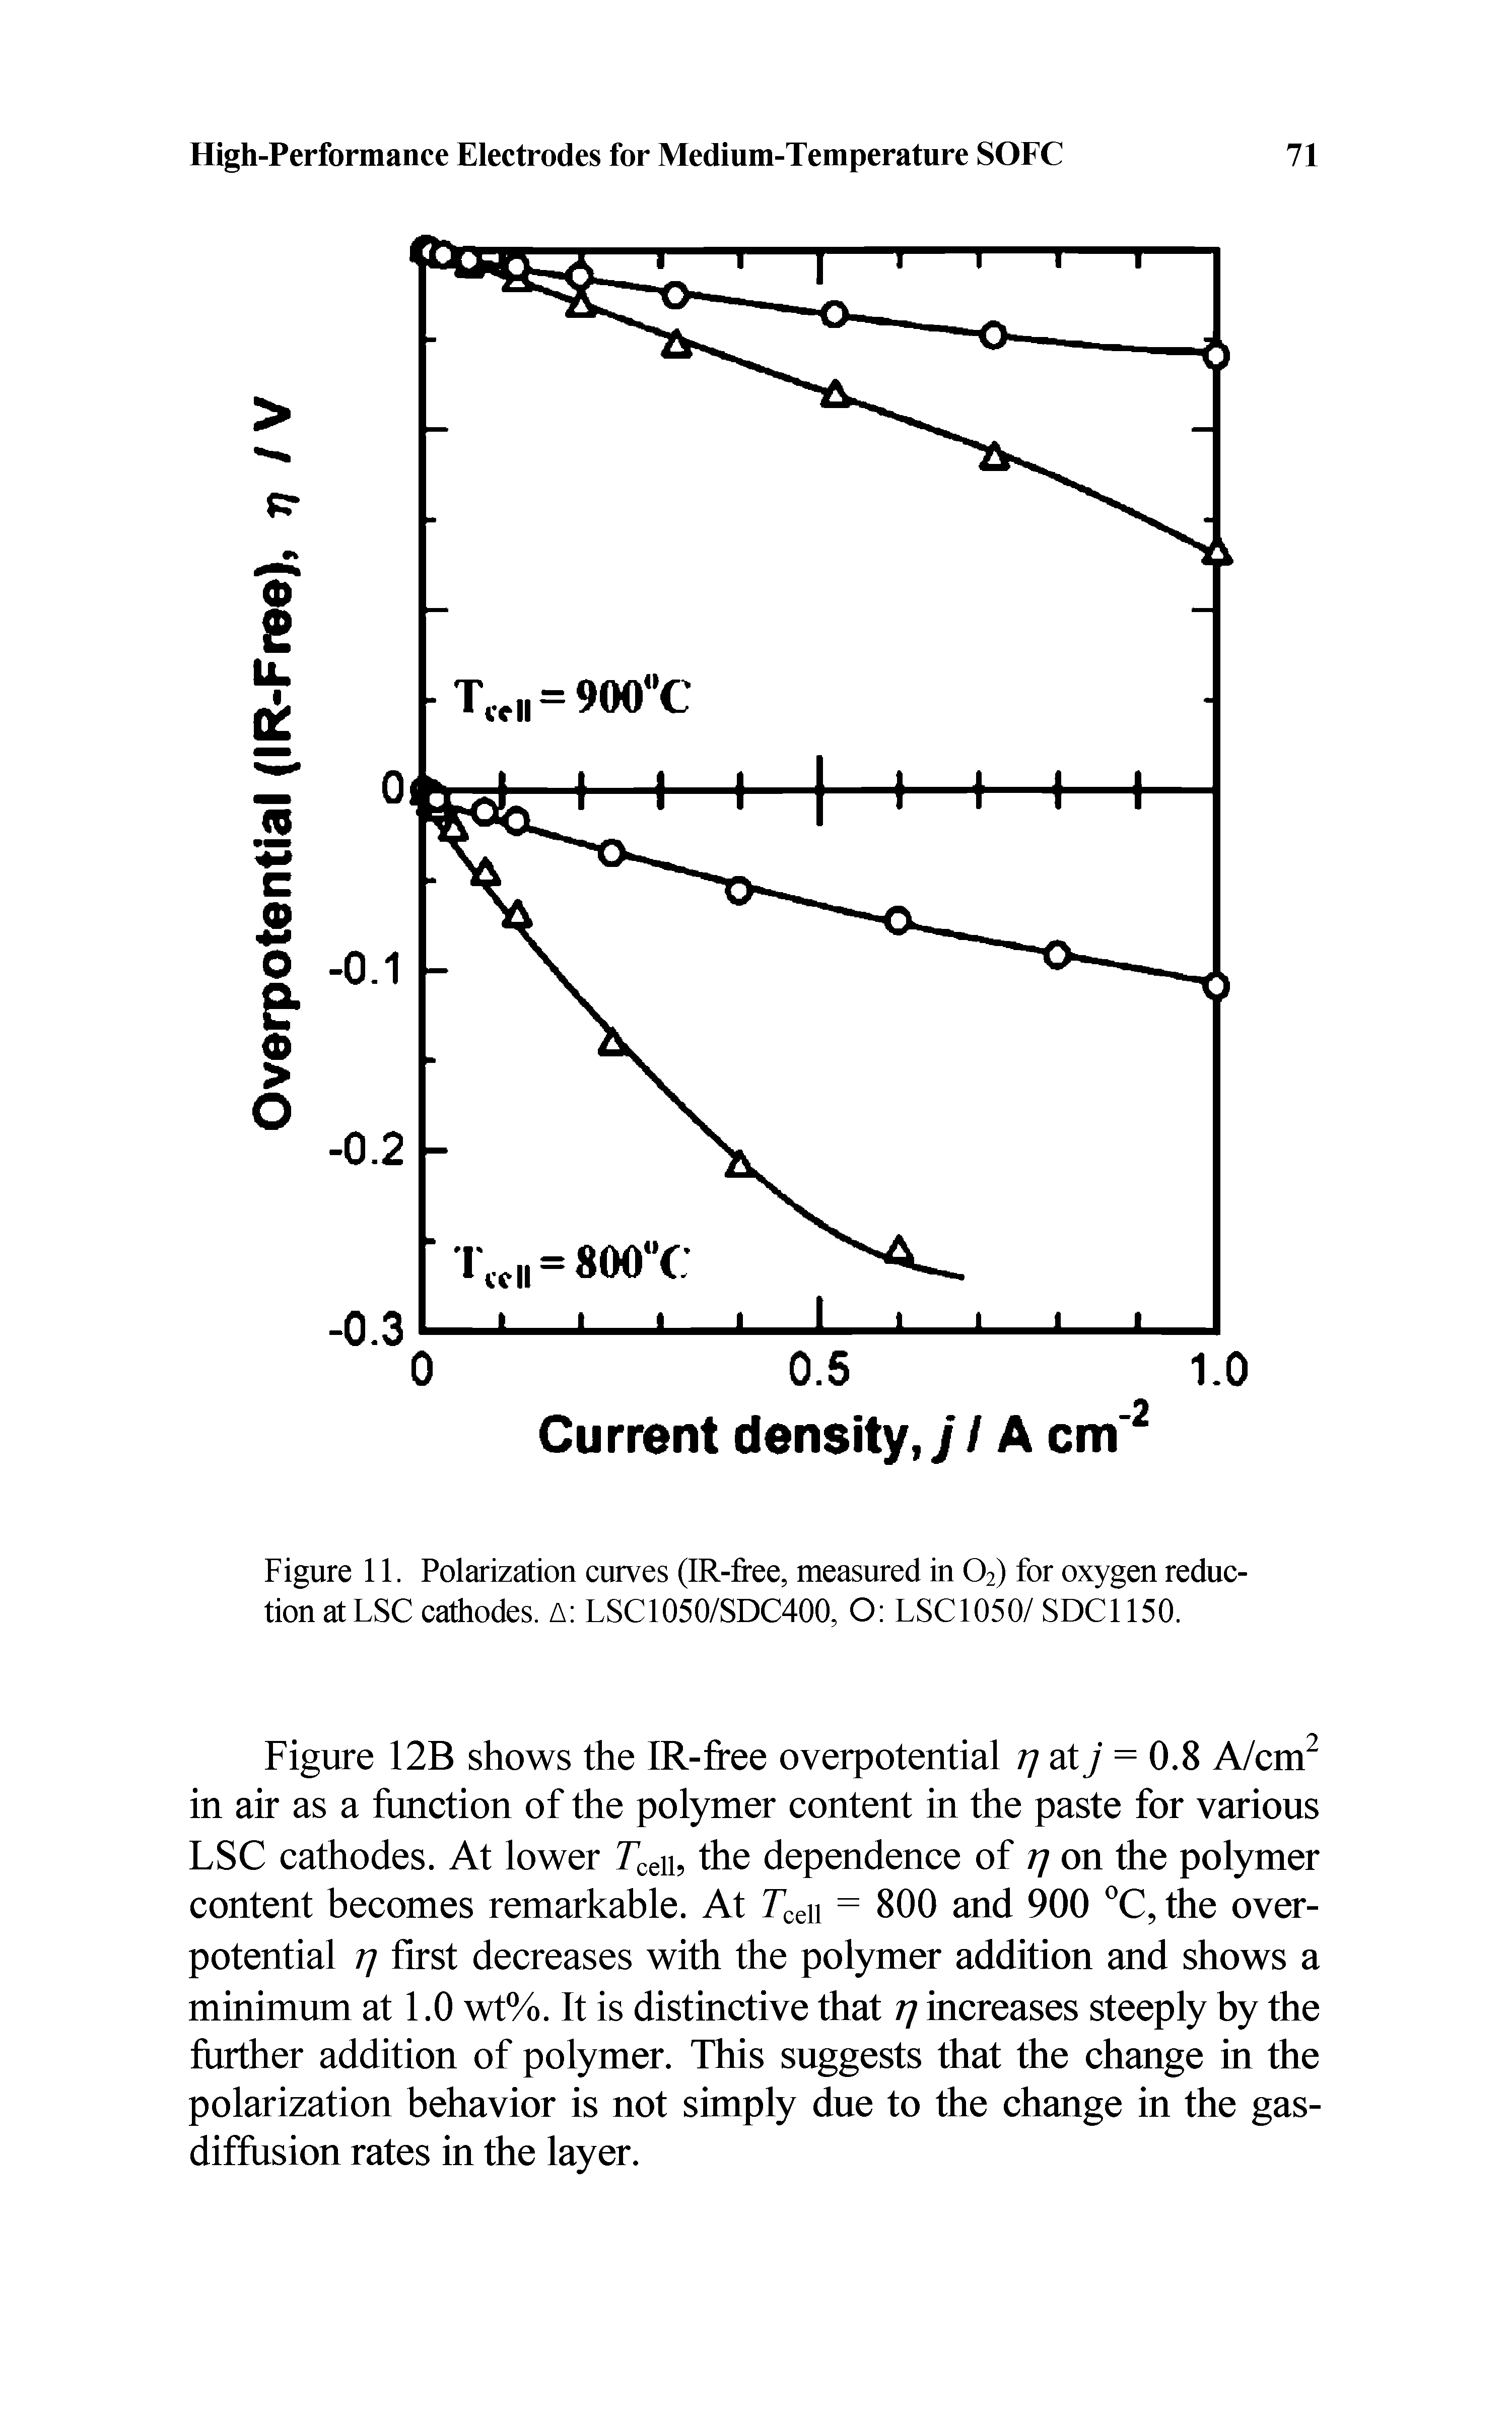 Figure 11. Polarization curves (IR-free, measured in O2) for oxygen reduction at LSC cathodes. A LSC1050/SDC400, O LSC1050/ SDCl 150.